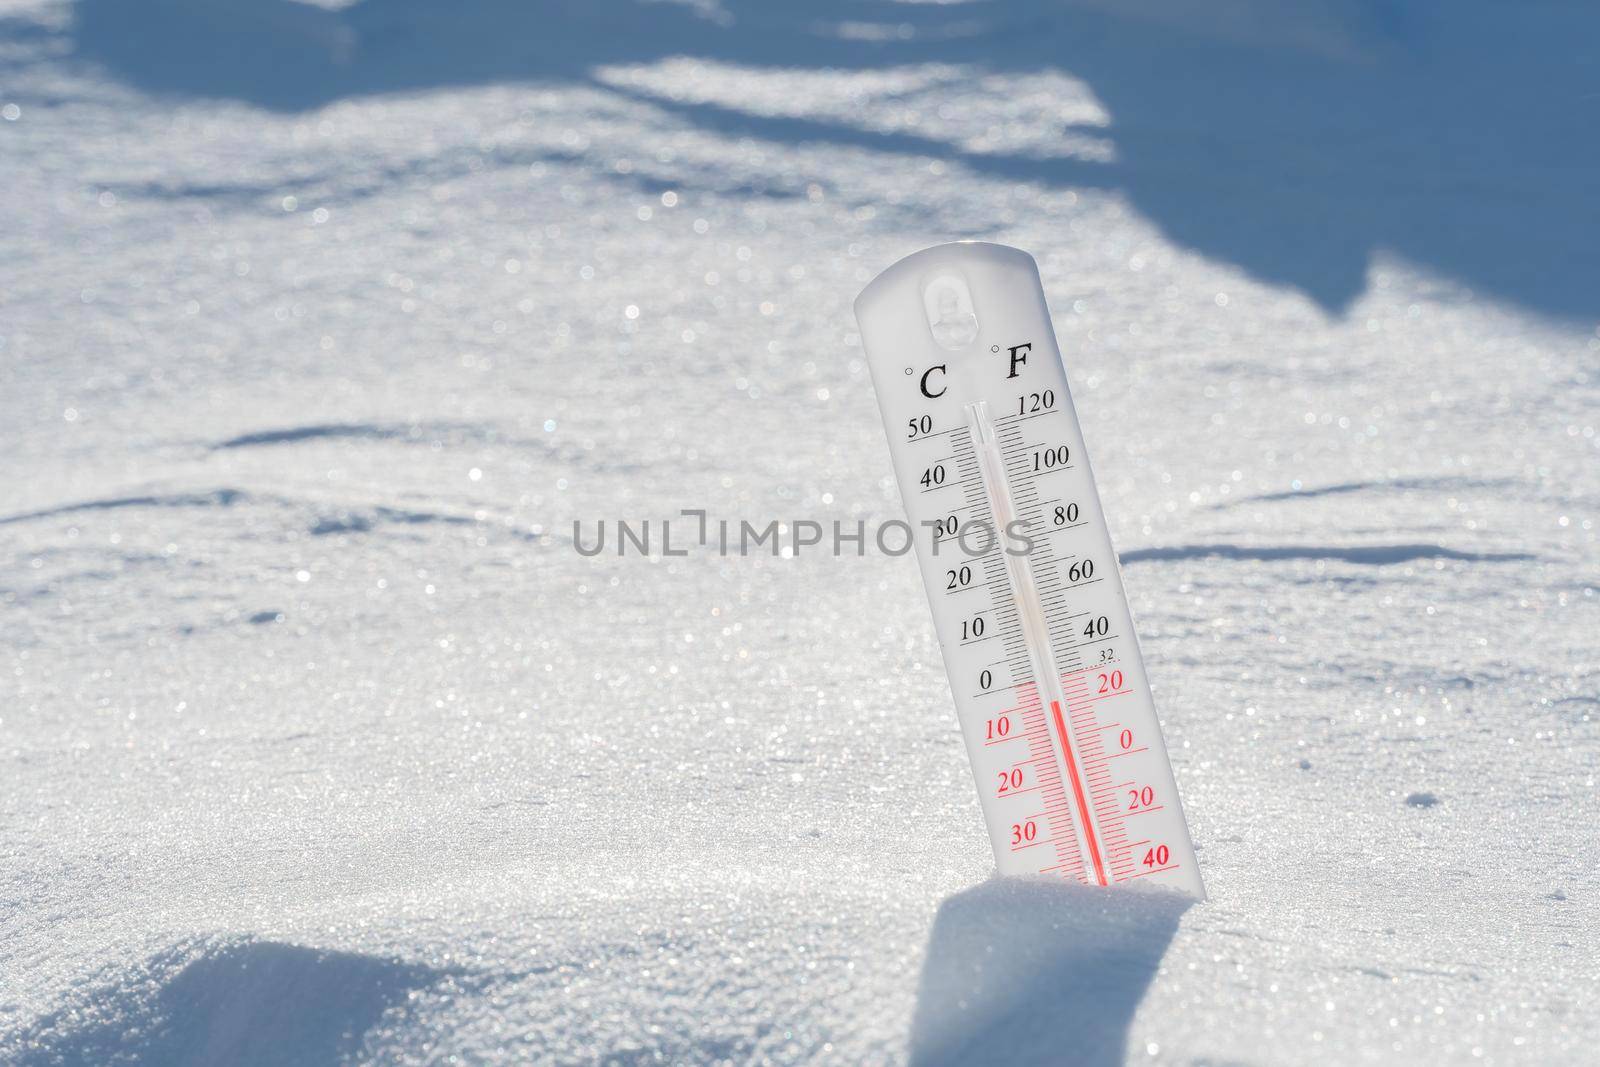 The thermometer lies on the snow and shows a negative temperature in cold weather on the blue sky.Meteorological conditions with low air and ambient temperatures.Climate change and global warming